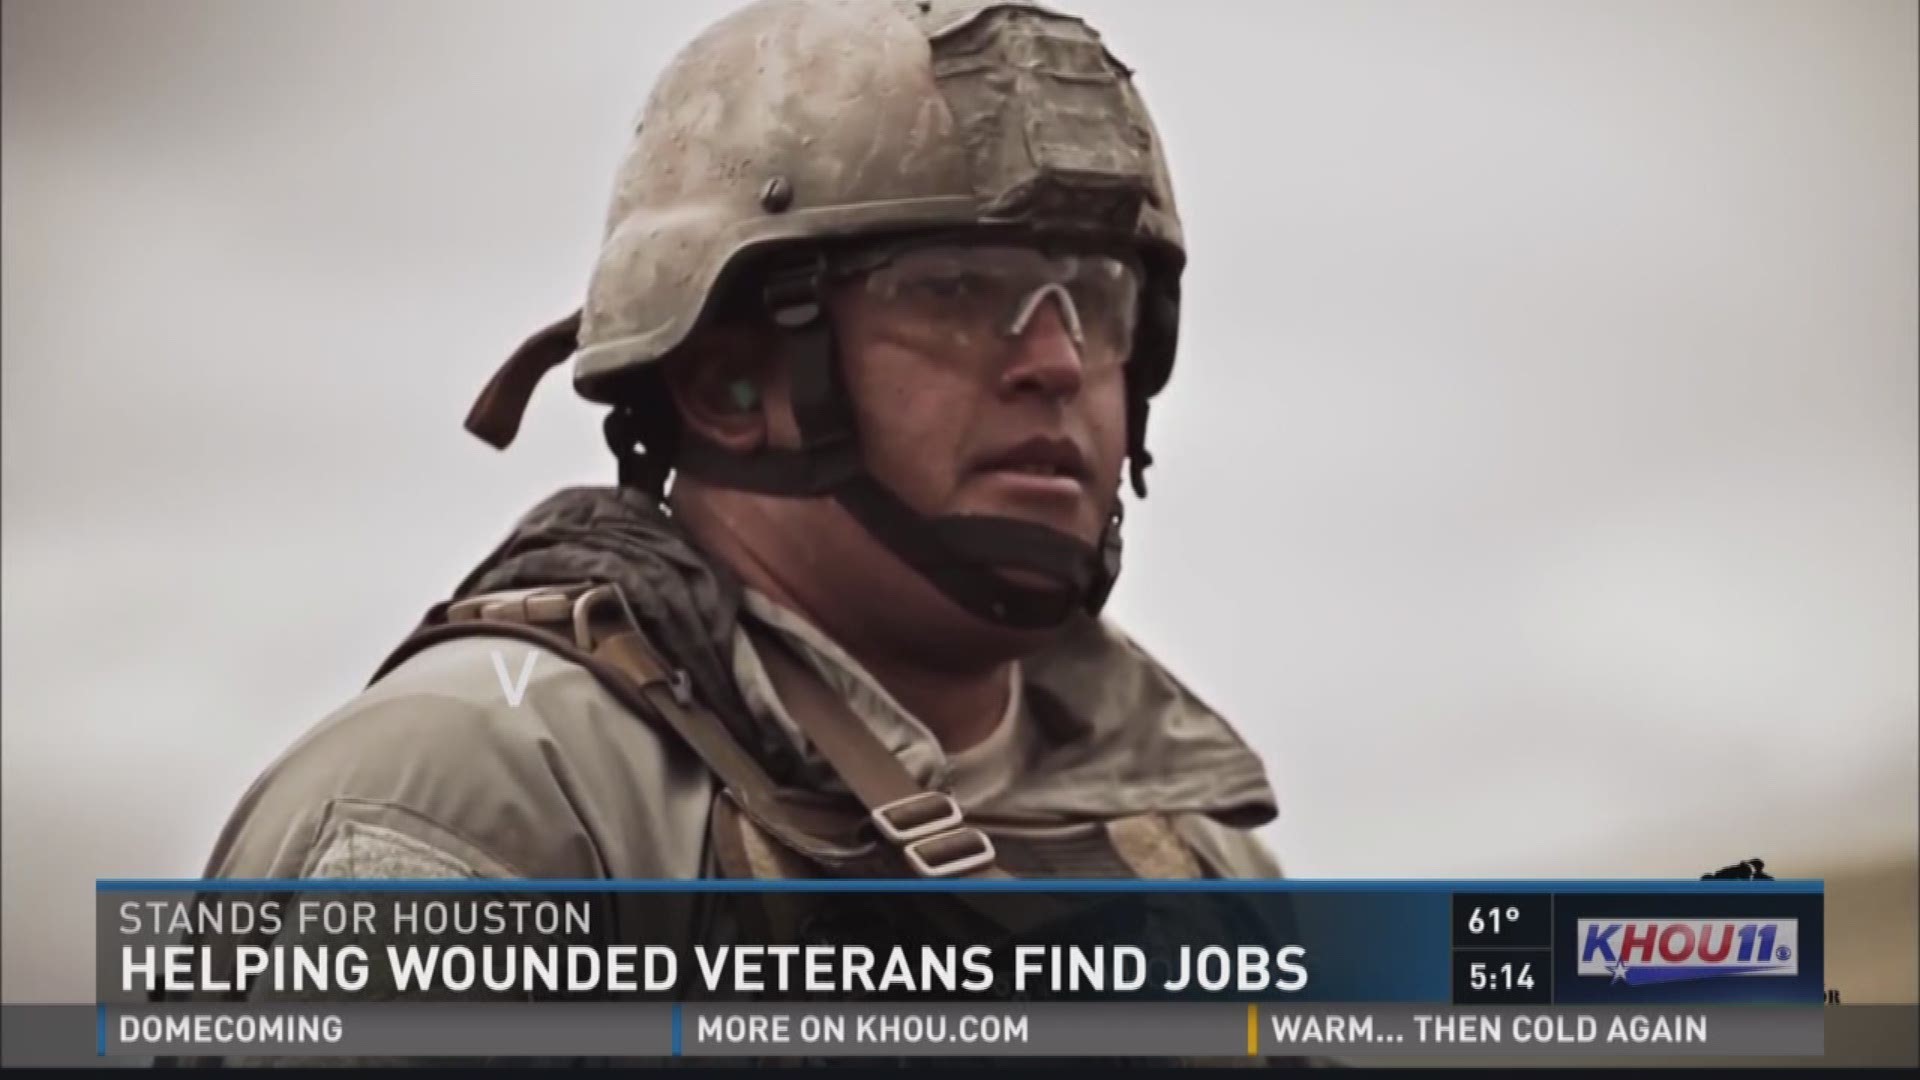 The Wounded Warrior Project offers free services to injured veterans including helping them find new jobs and careers in the civilian world. 